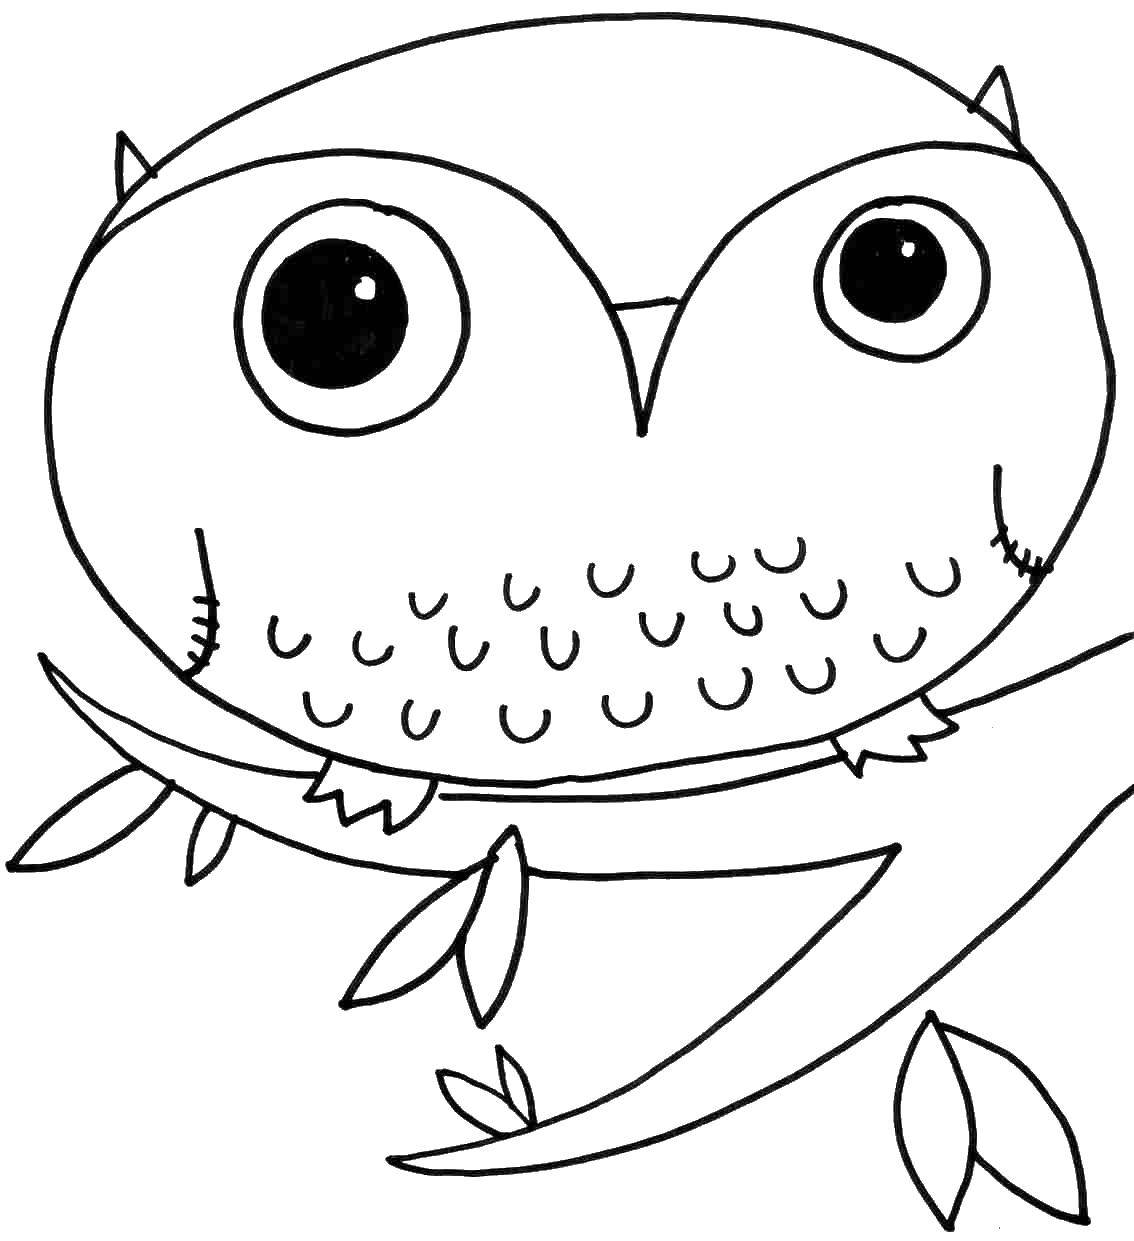 Coloring Owl on the branch. Category birds. Tags:  the owl, branch, leaves.